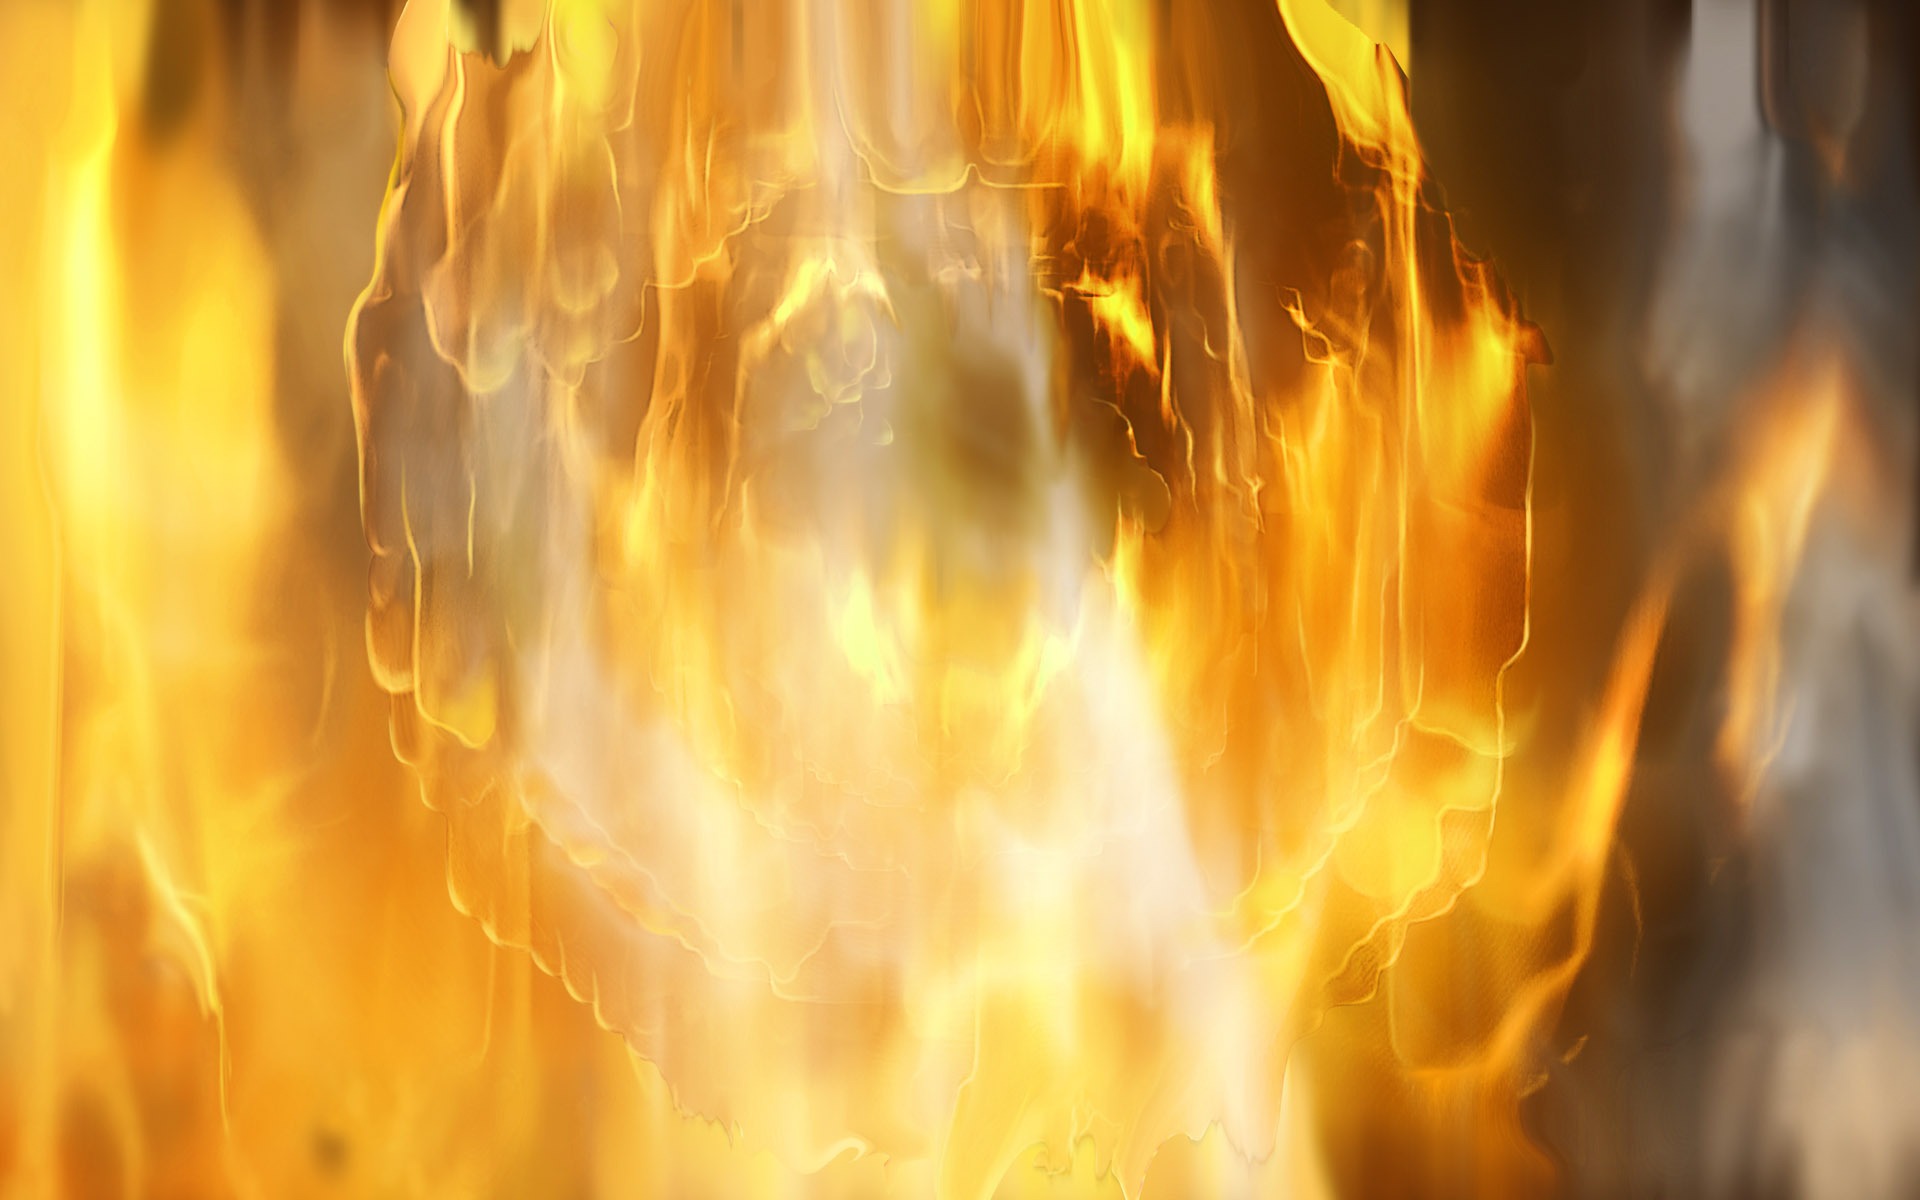 Flame Feature HD Wallpaper #12 - 1920x1200